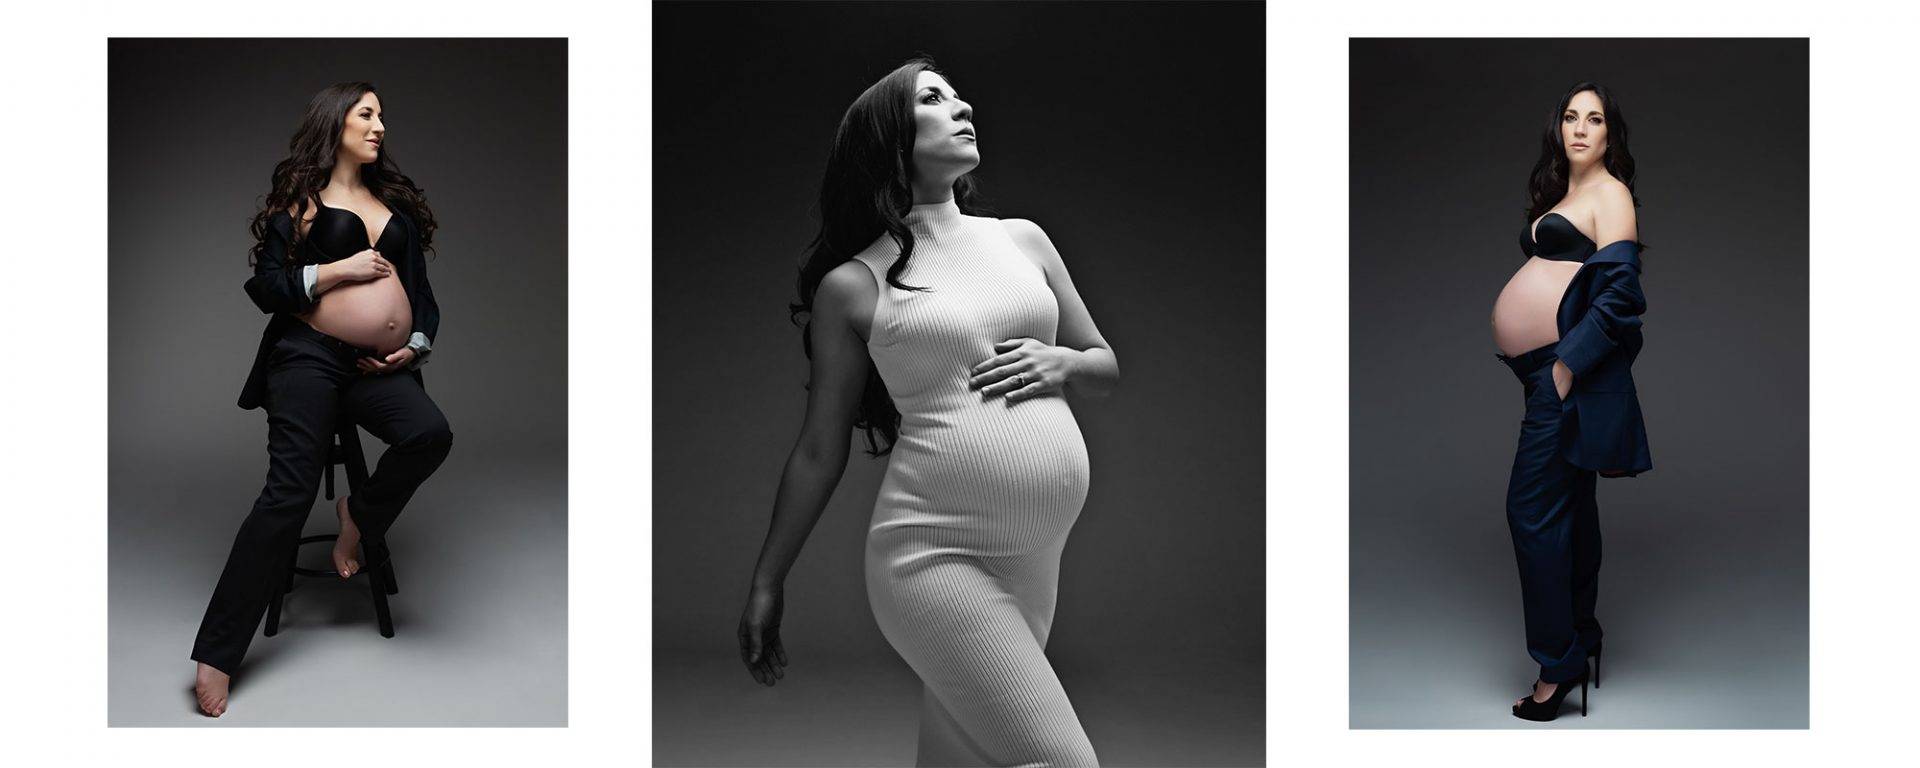 Pregnant lady wearing a suit for maternity photos.